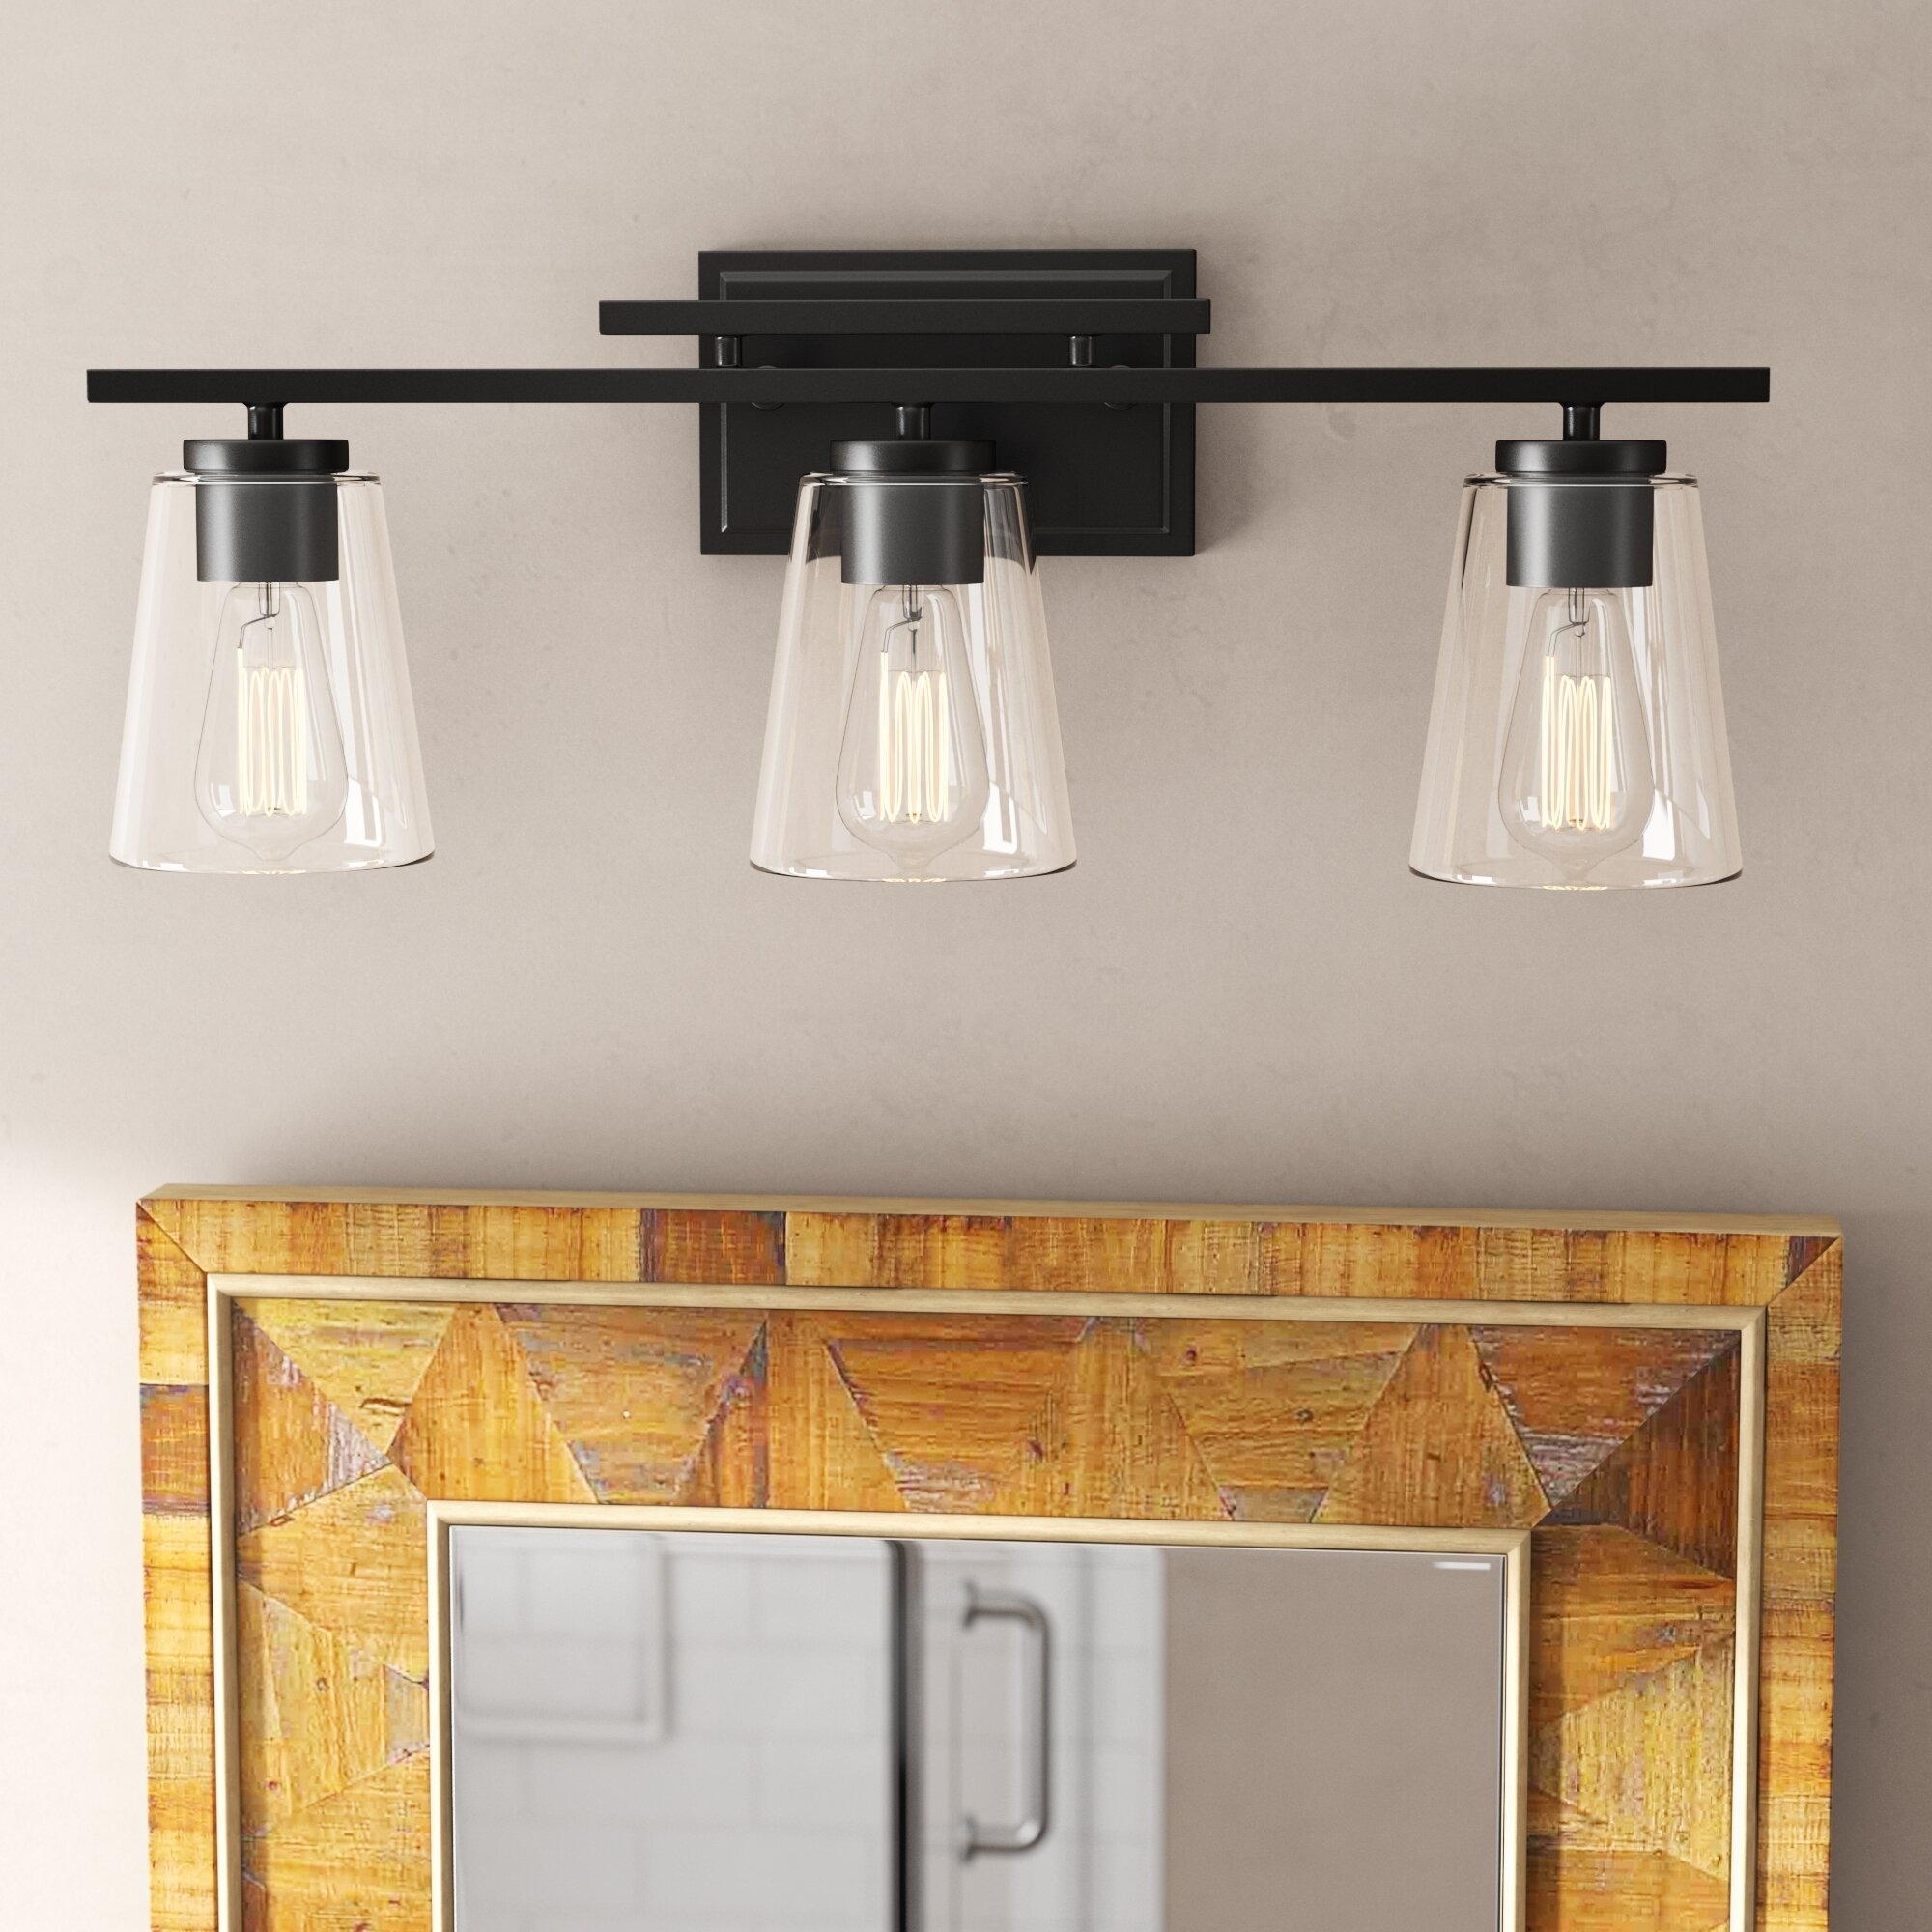 Wall-mounted lighting fixture with three glass shades